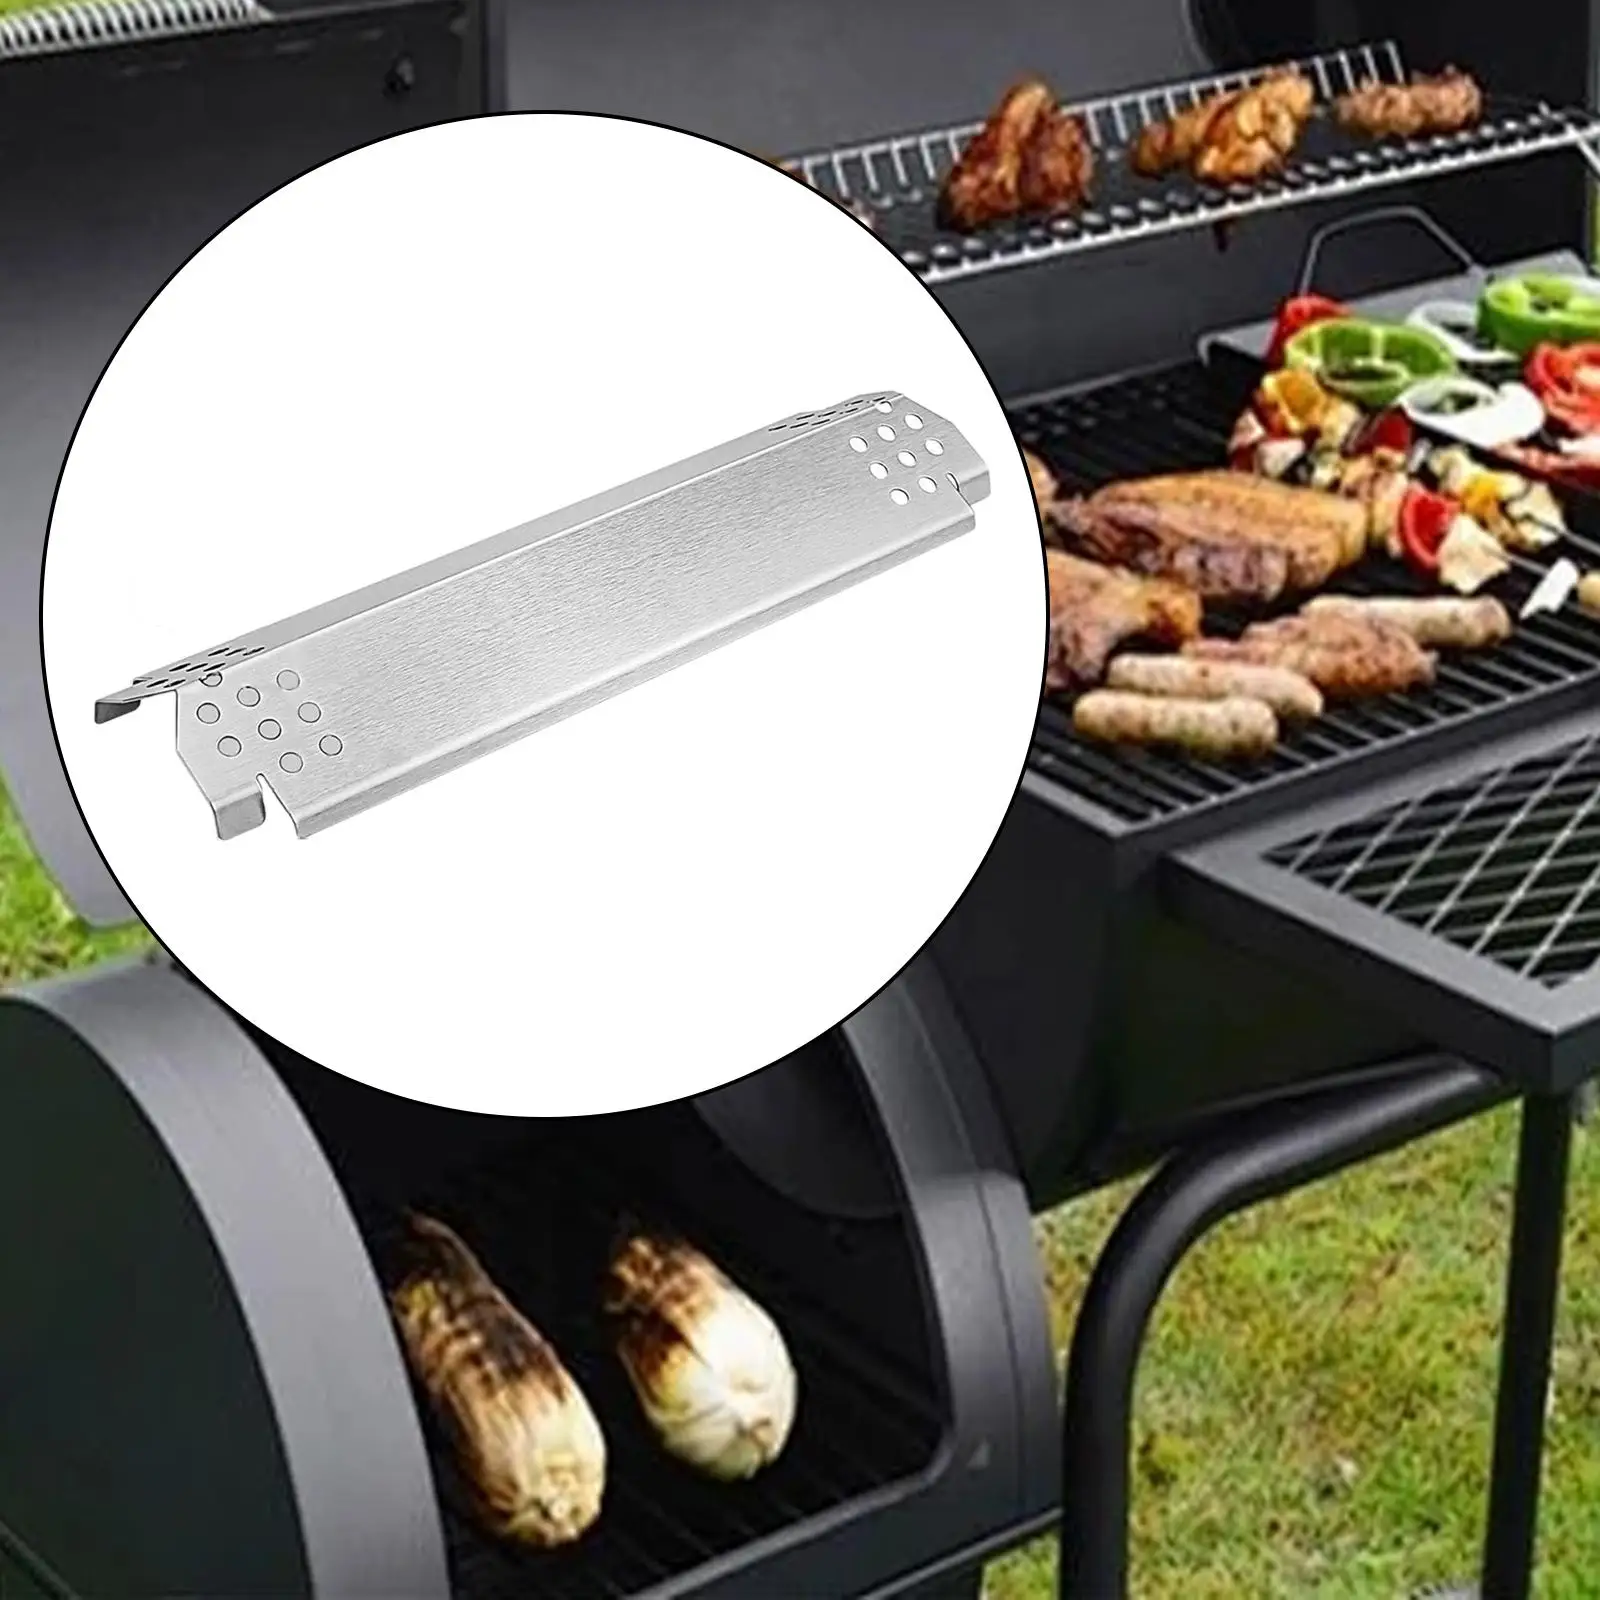 

Grill Heat Plates Heat Deflector Silver,Replace Parts Heat Diffusers Heat Tent Burner Cover for Outdoor,Most Gas Grill